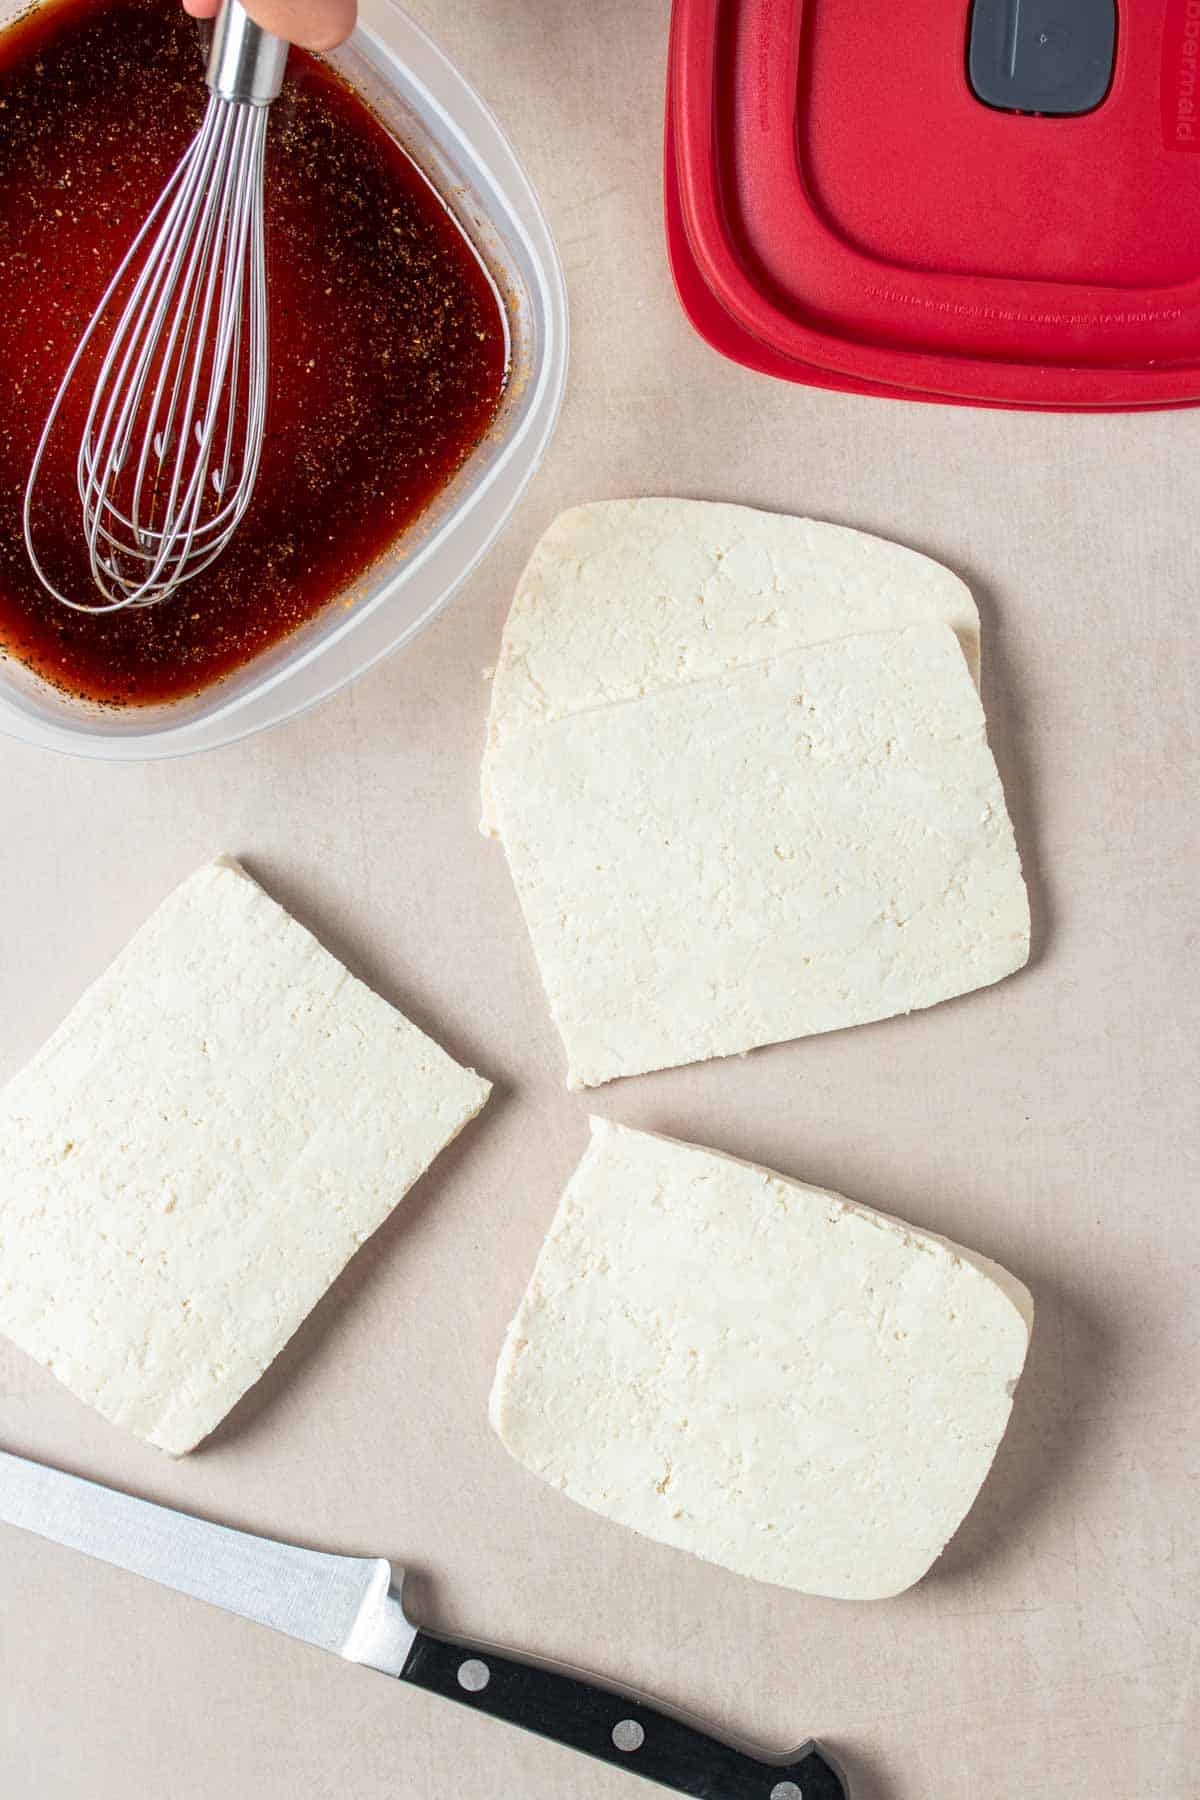 Top view of thinly sliced tofu and brown liquid in a plastic container being whisked next to a red lid.